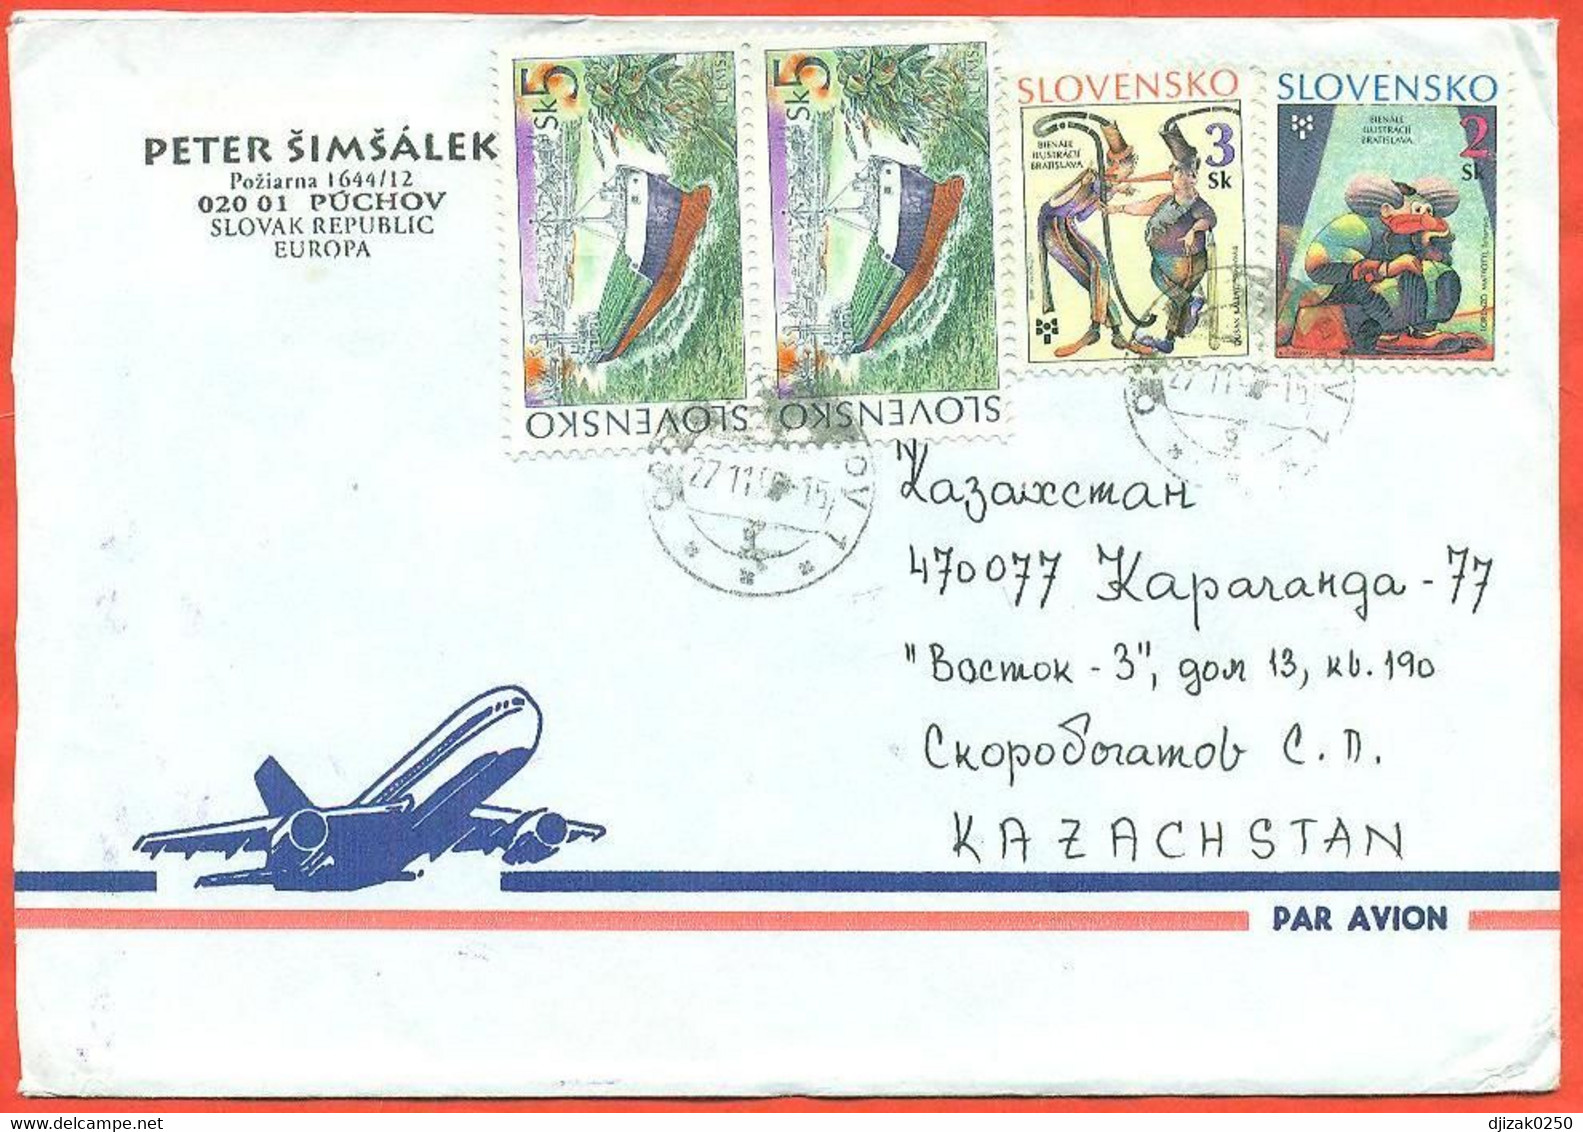 Slovakia 1995. The Envelope Passed Through The Mail. - Covers & Documents